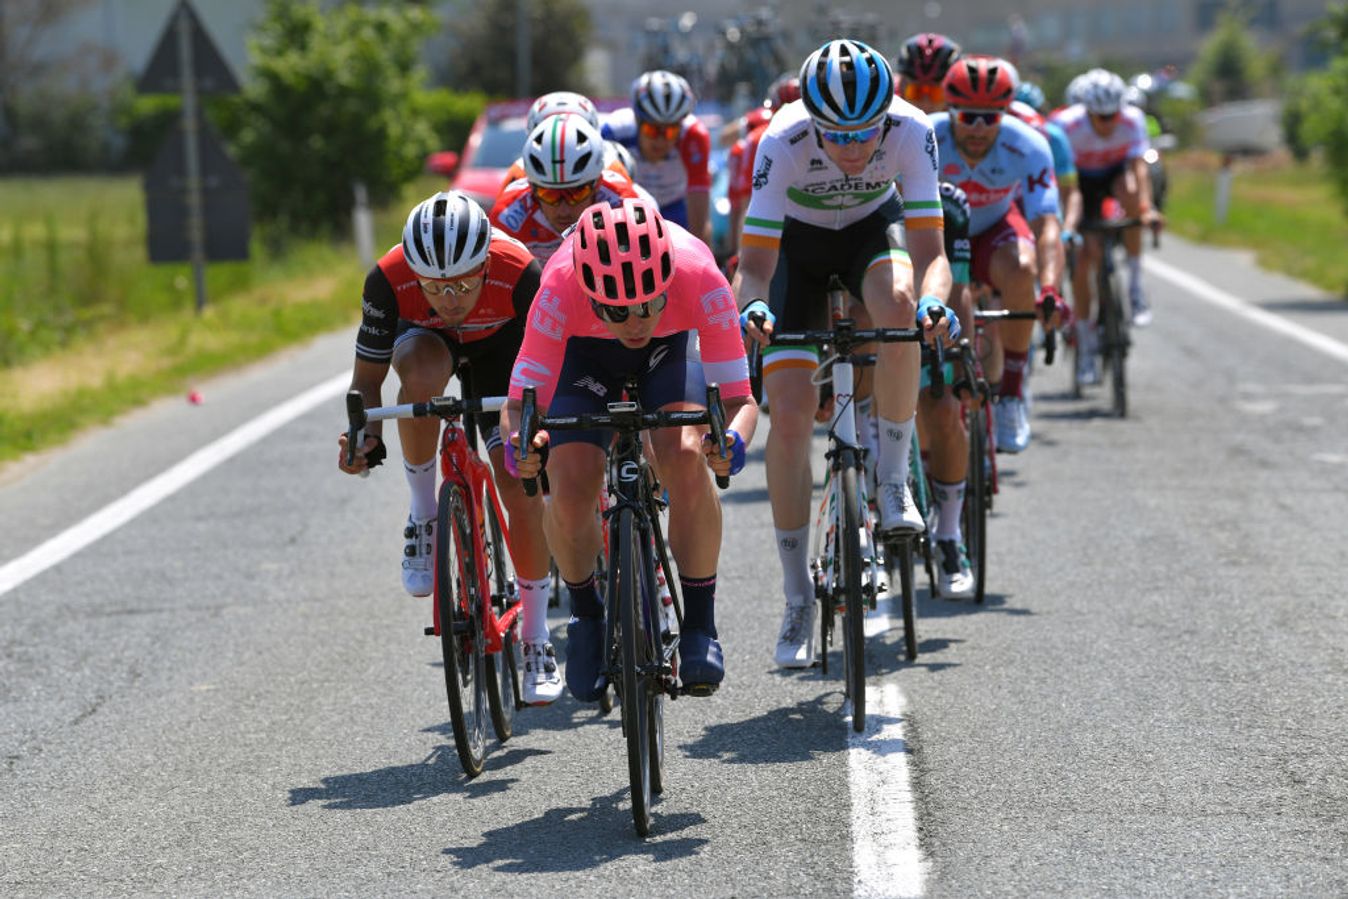 Having made the day's breakaway, stage 12 proved to be a day of personal triumph for Conor